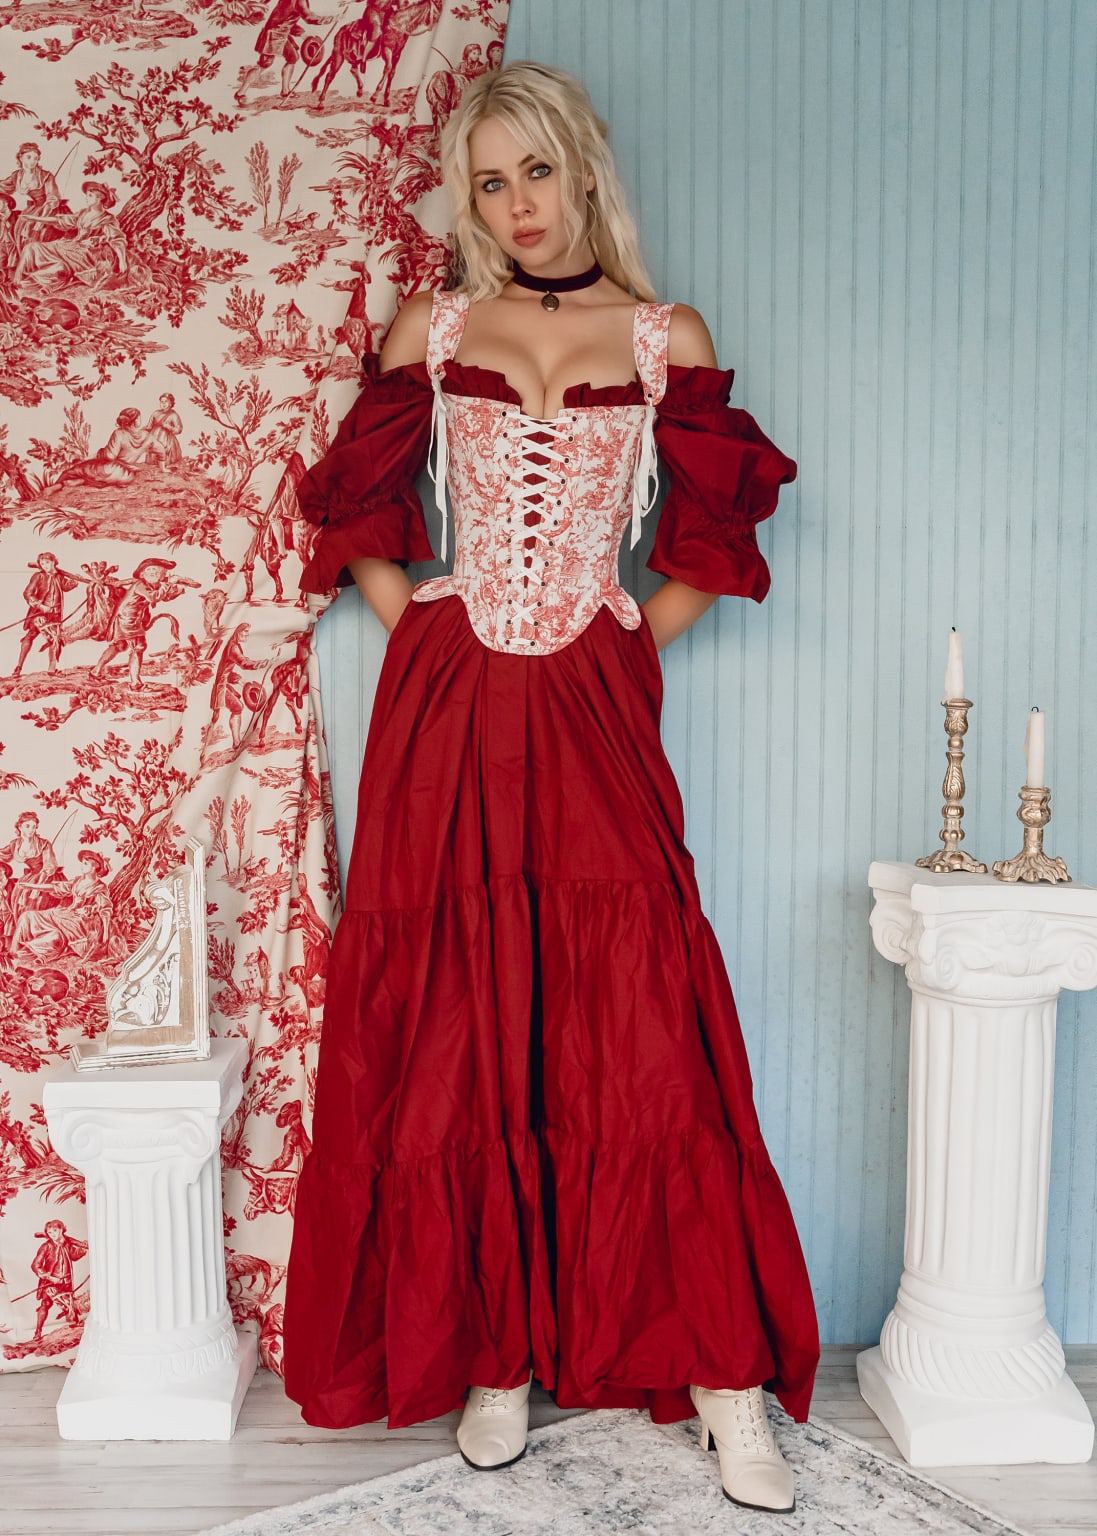 Red Toile Stays Corset - Enjoué Collectif